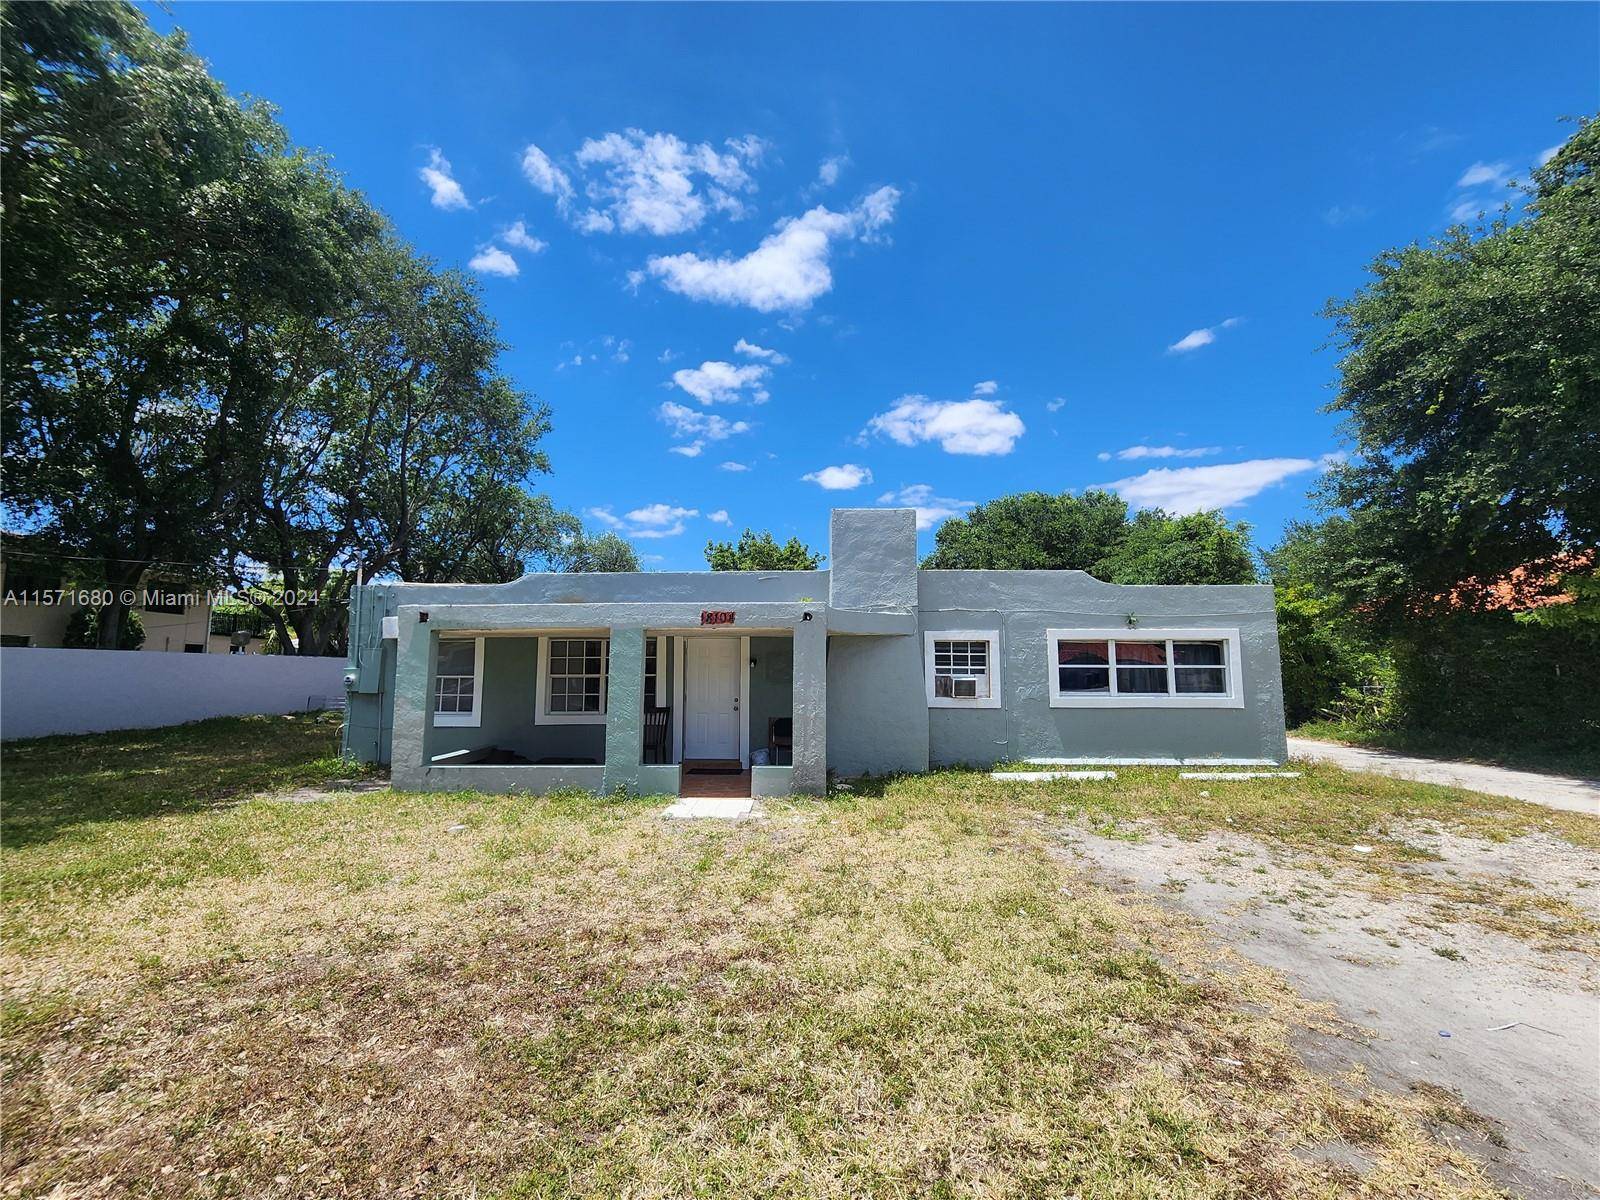 INTRODUCING AN GREAT INVESTMENT PROSPECT NESTLED IN THE HEART OF MIAMI GARDENS, OFFERING A LUCRATIVE BLEND OF IMMEDIATE INCOME AND FUTURE EXPANSION POTENTIAL.